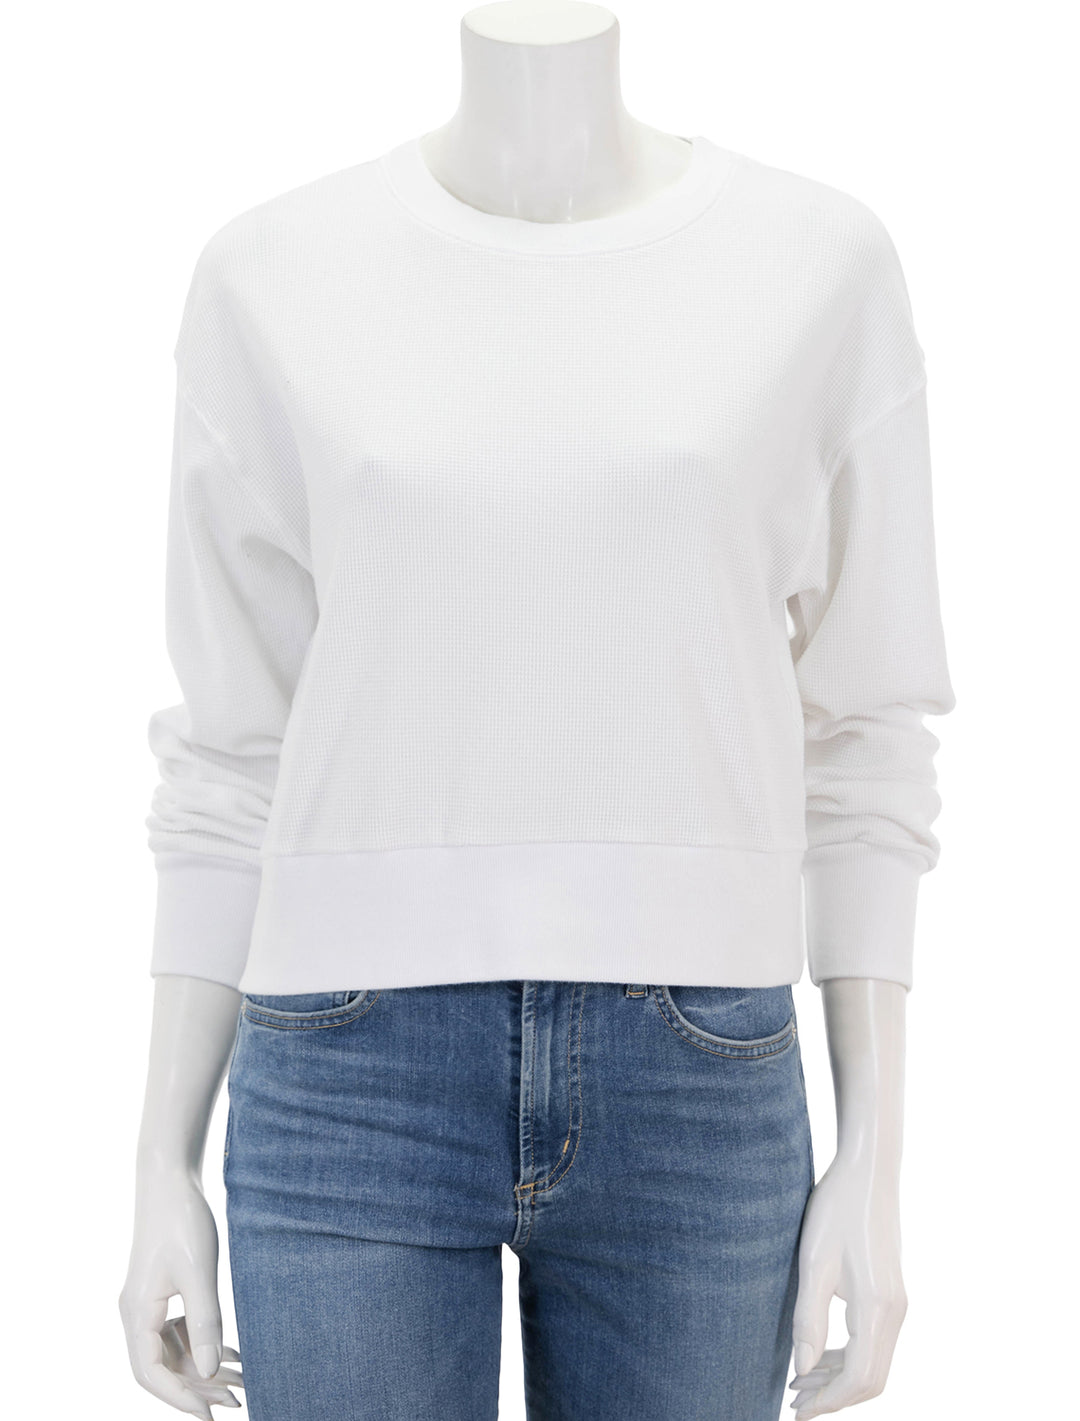 Front view of Perfectwhitetee's kendall waffle sweatshirt in white.